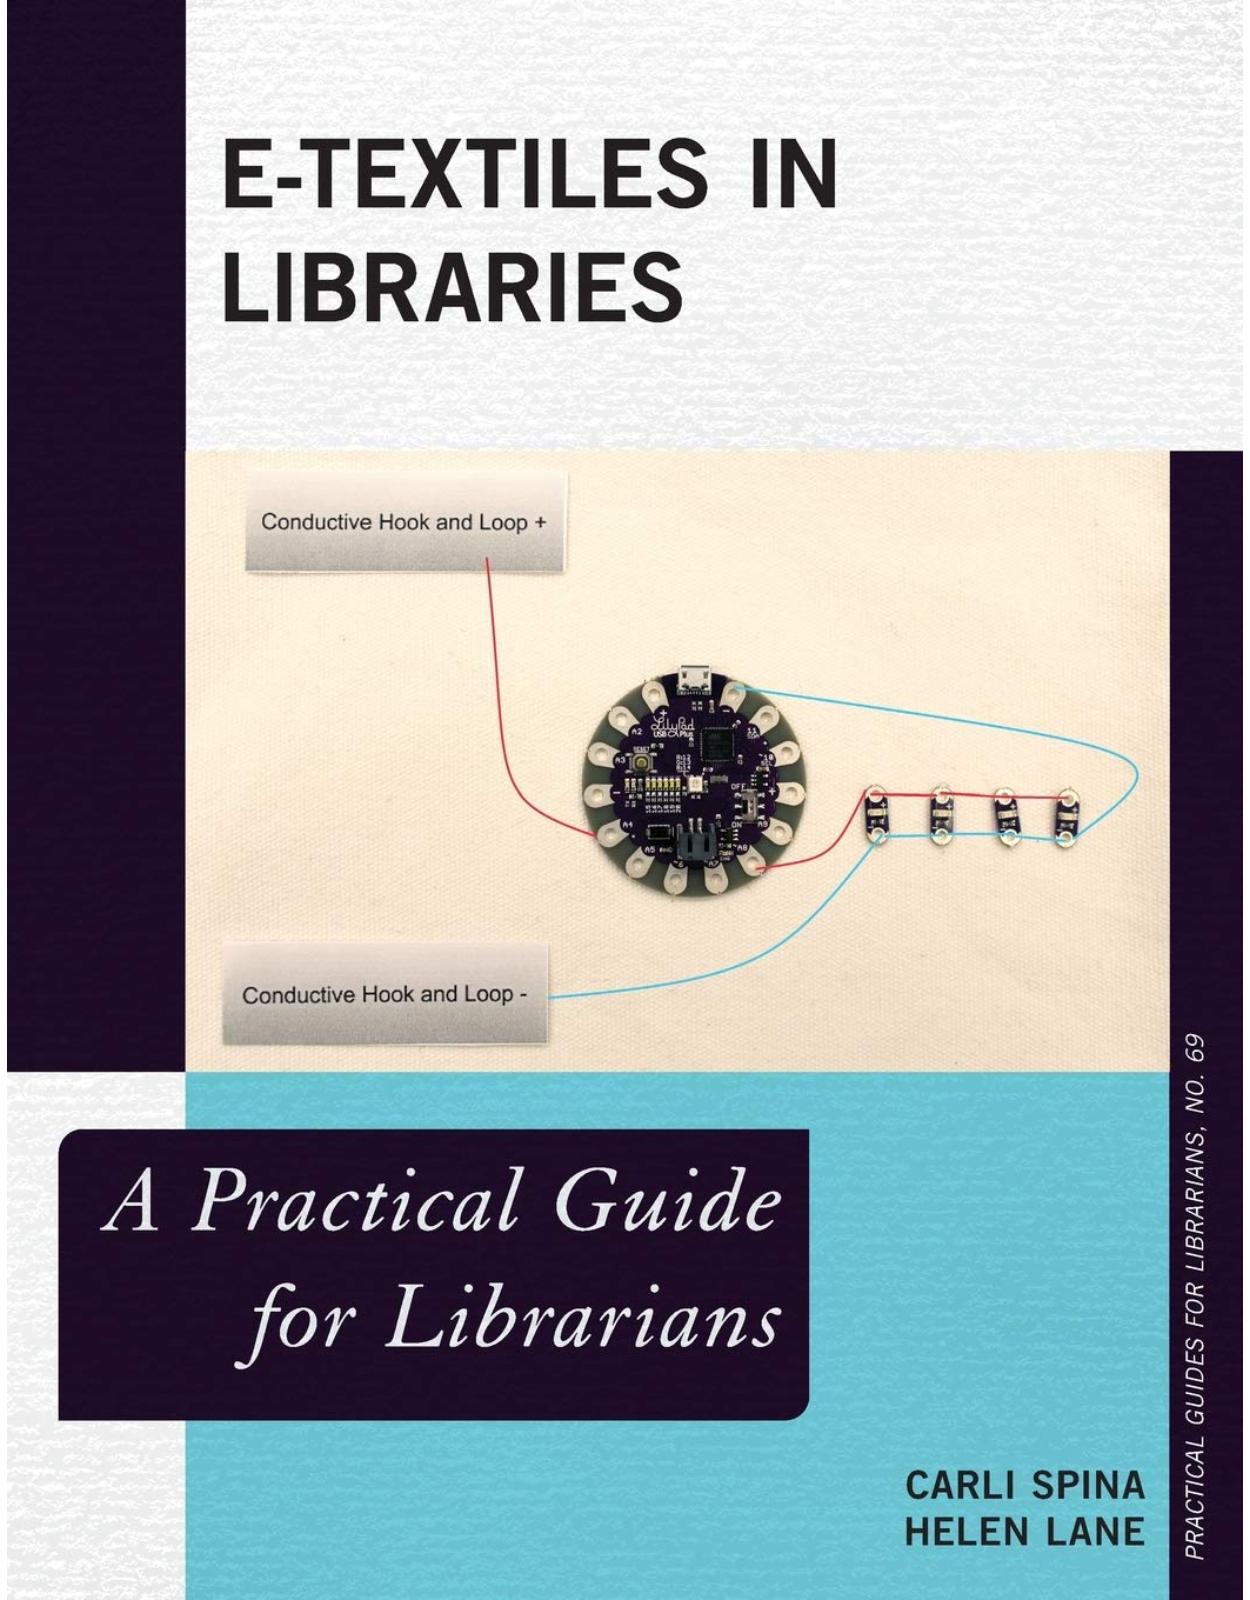 E-Textiles in Libraries: A Practical Guide for Librarians: 69